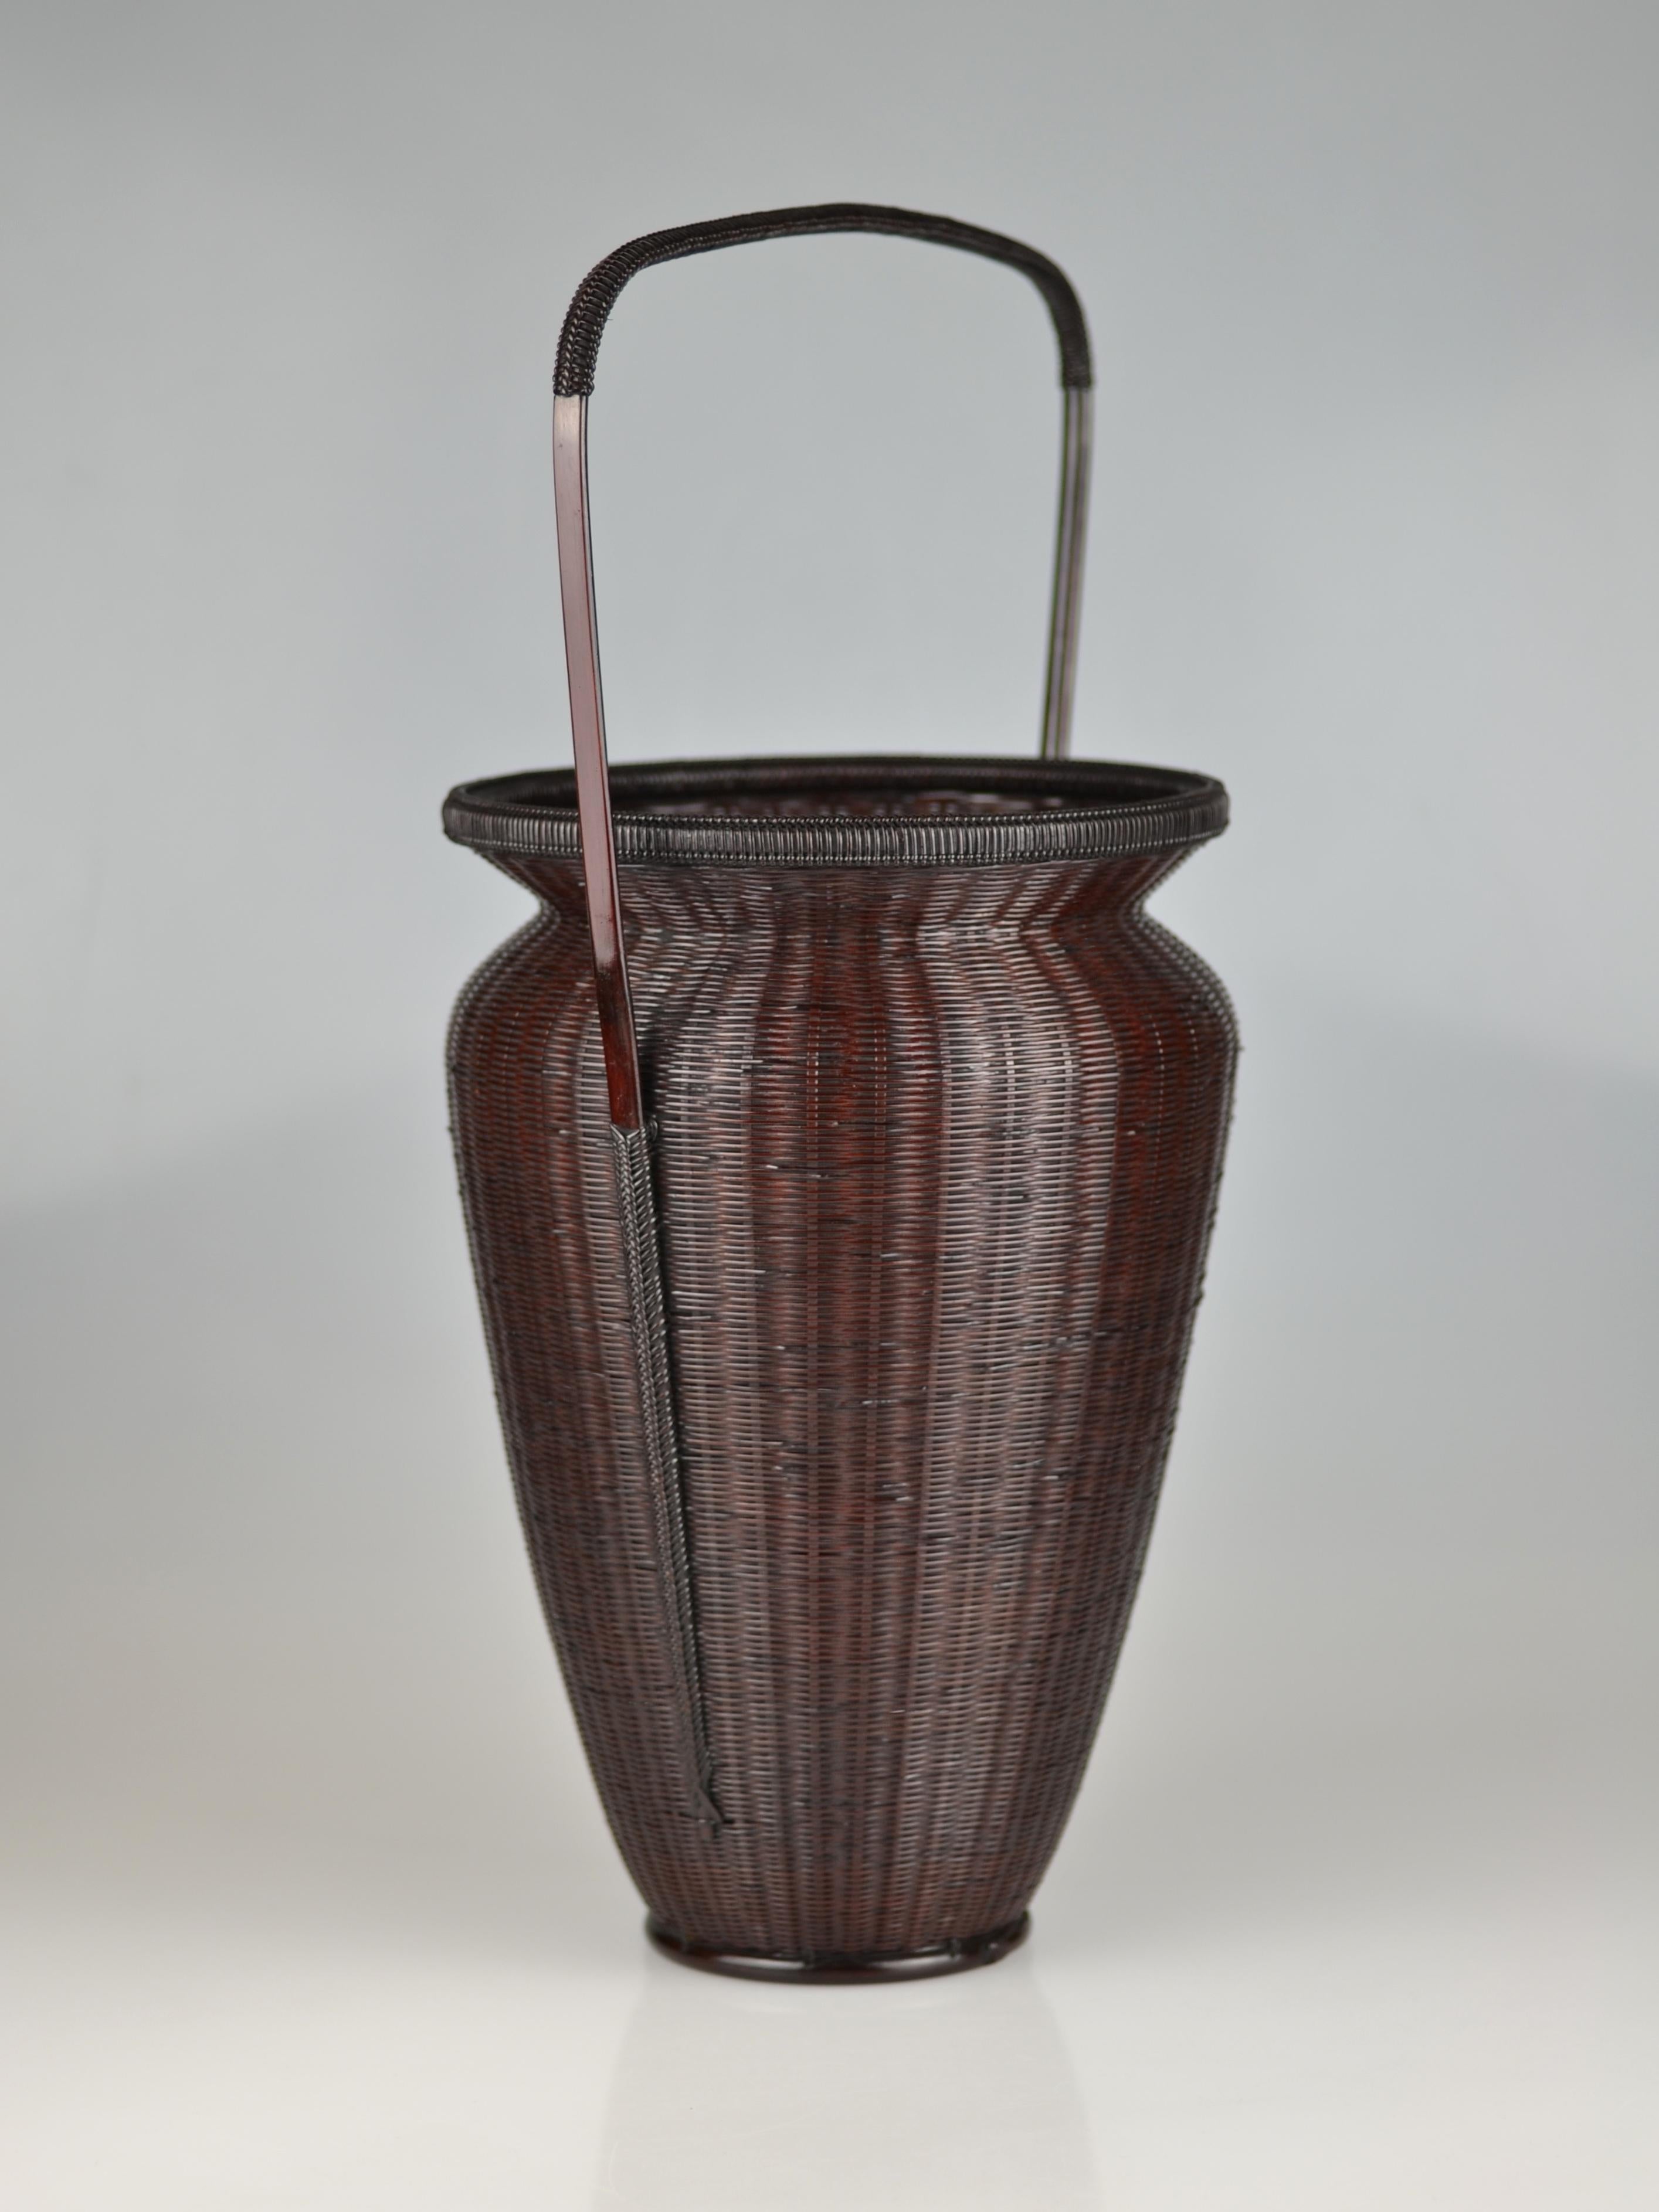 Traditional, well-balanced bamboo flower basket in Chinese style with rattan wrapped handle. The mat plaited wall ends in a wide open mouth with a rattan wrapped rim. The handle is beautifully woven into the vessel's side and finishs close to the